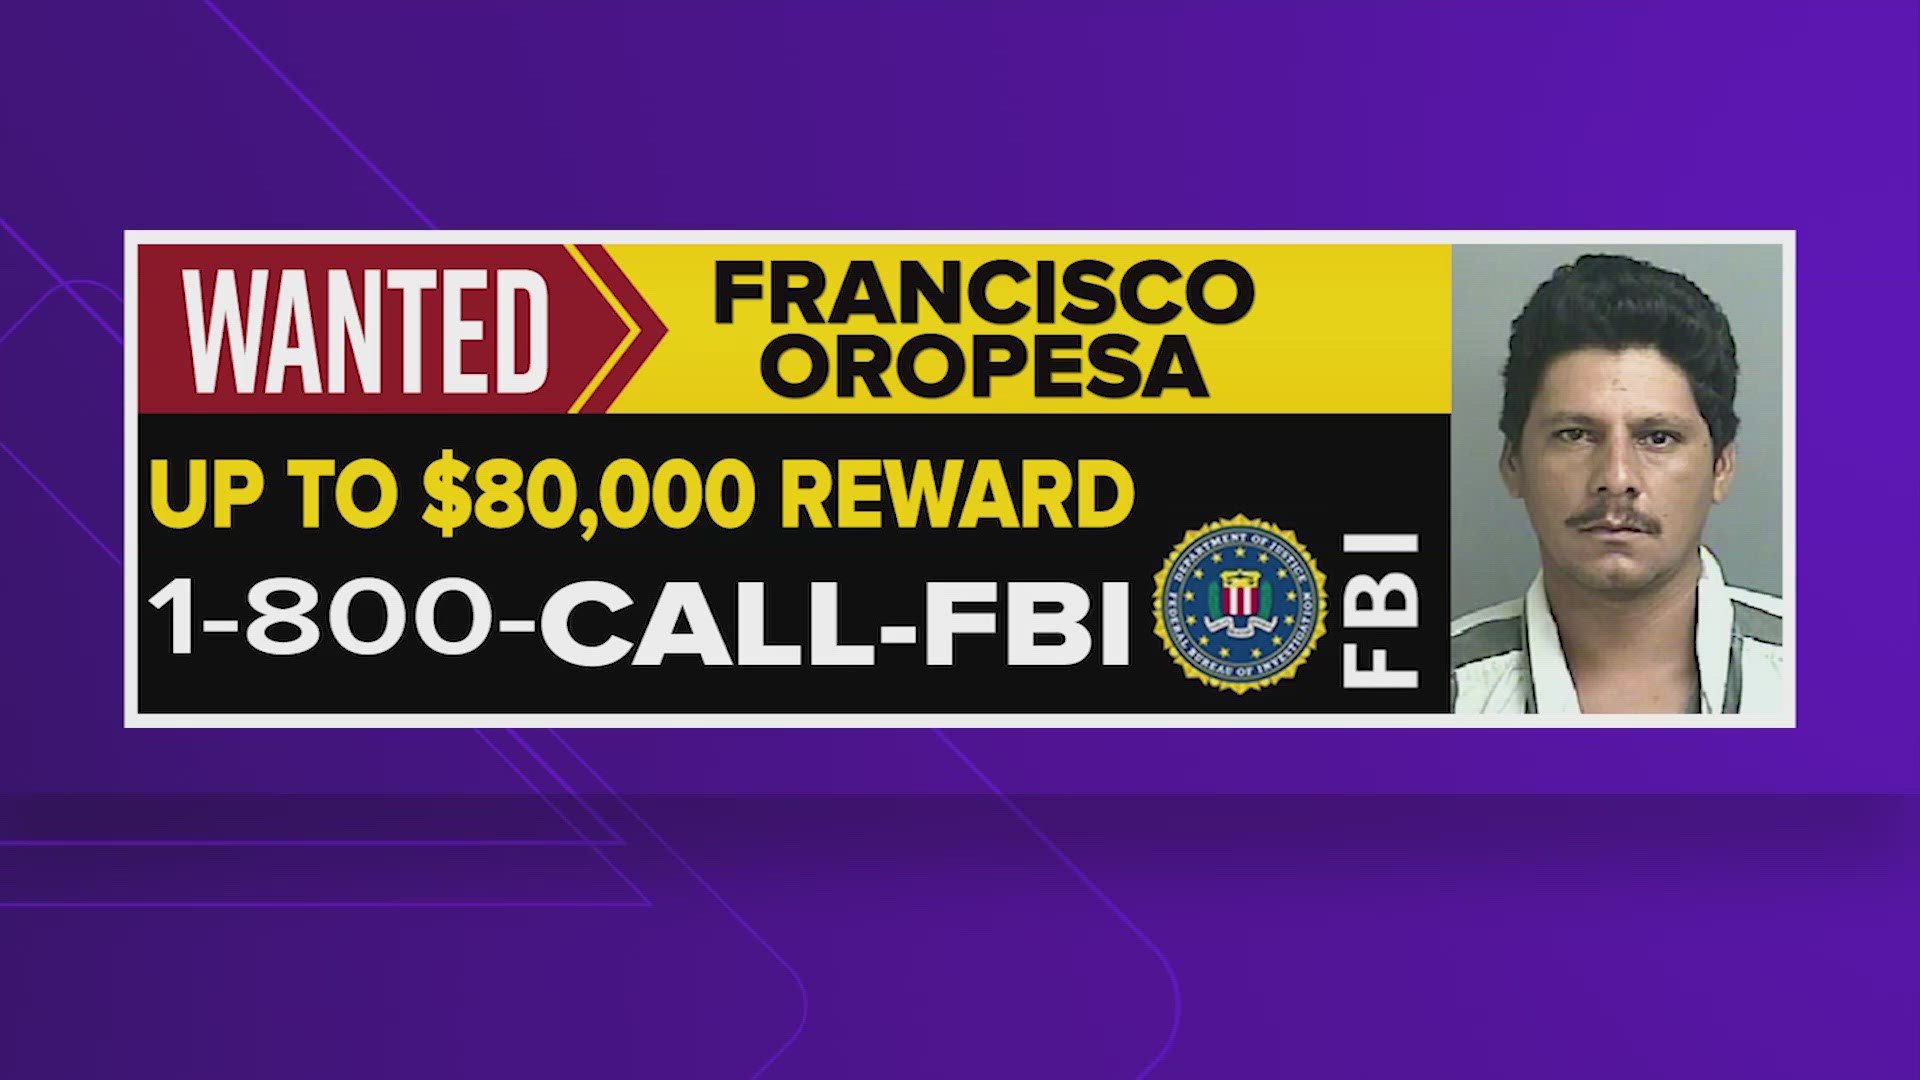 The manhunt for Francisco Oropeza continues after he allegedly killed five people near Cleveland, Texas.